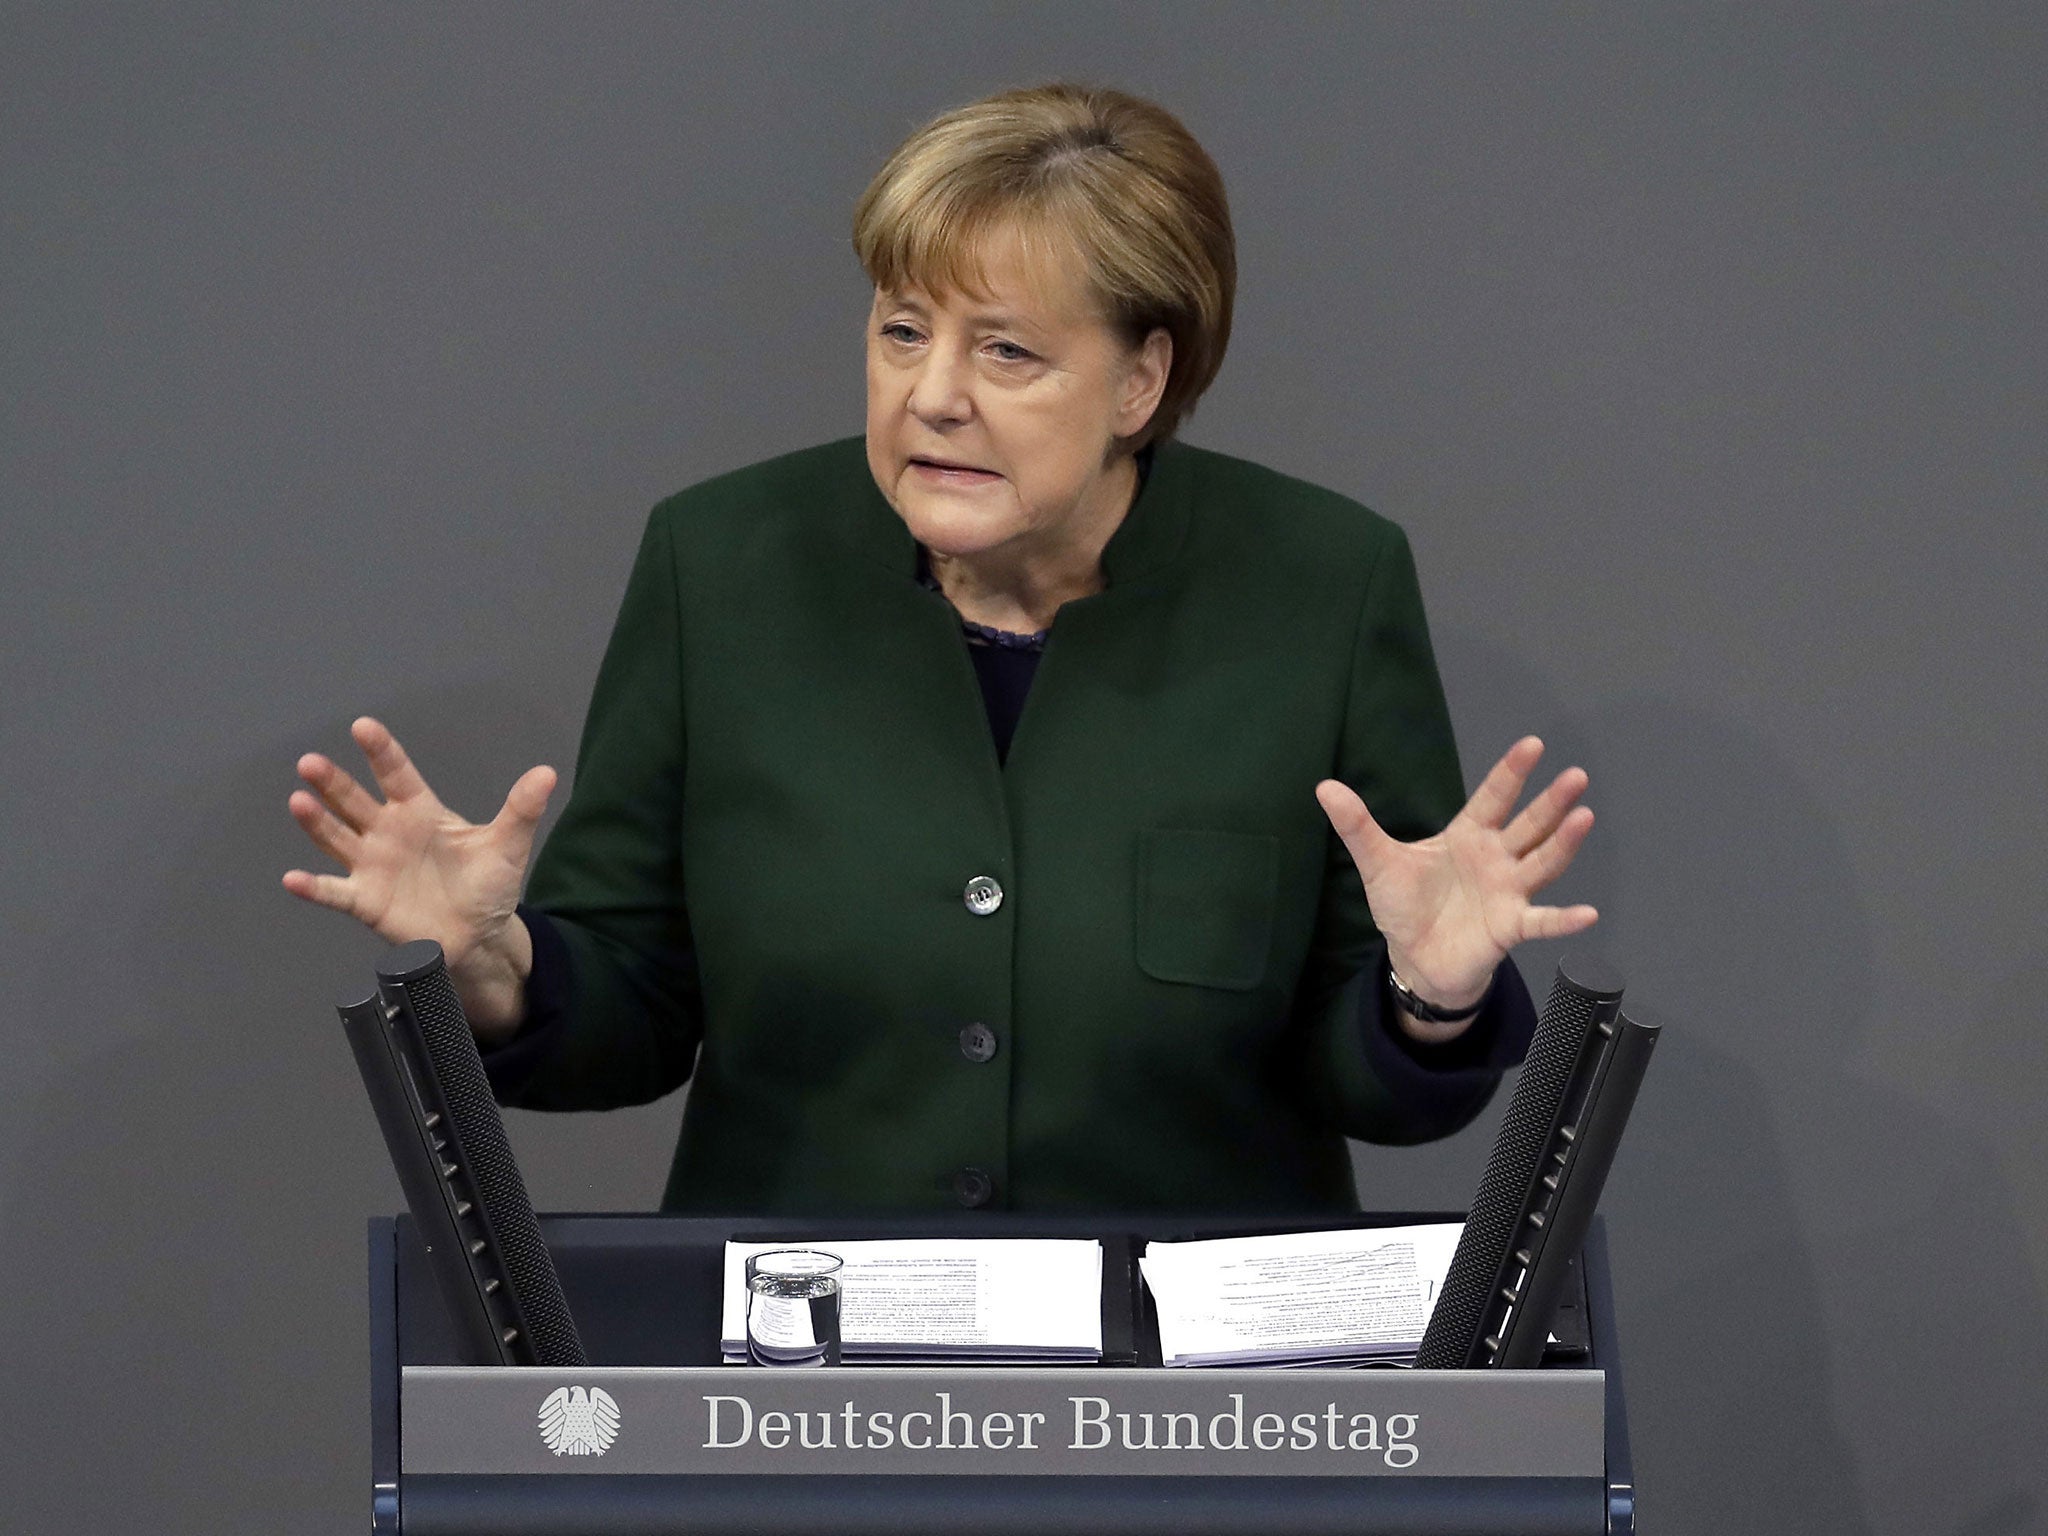 'I don't know who will benefit' from the demise of the TPP deal, German Chancellor Angela Merkel says